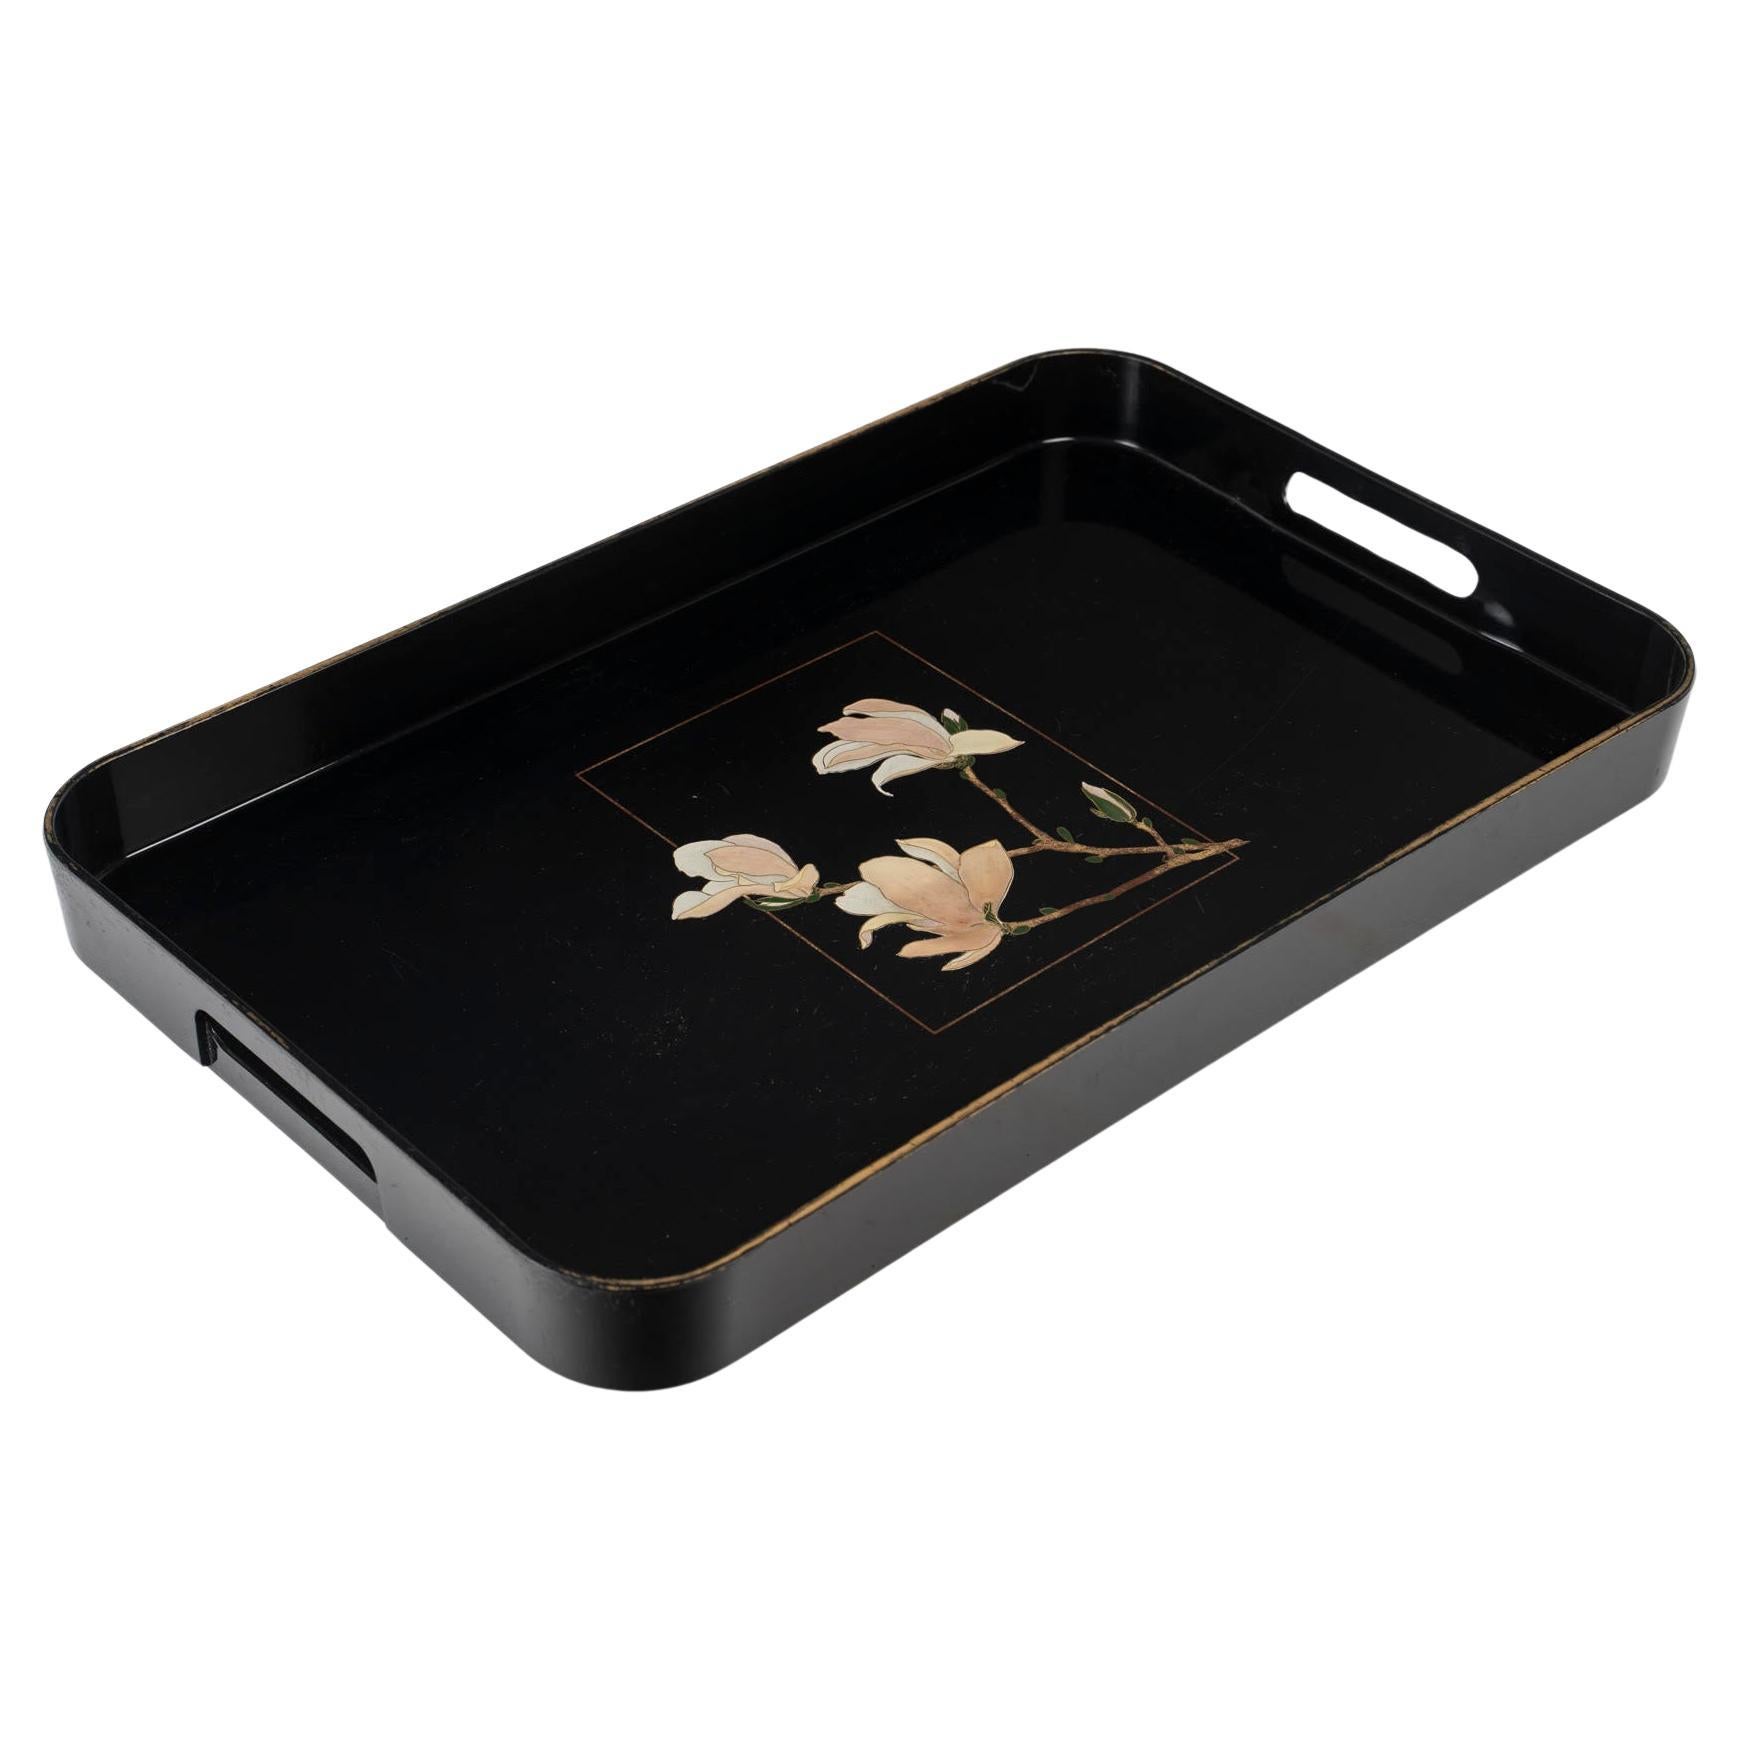 Black Lacquered Wooden Tray with Floral Motifs, Circa 1980.